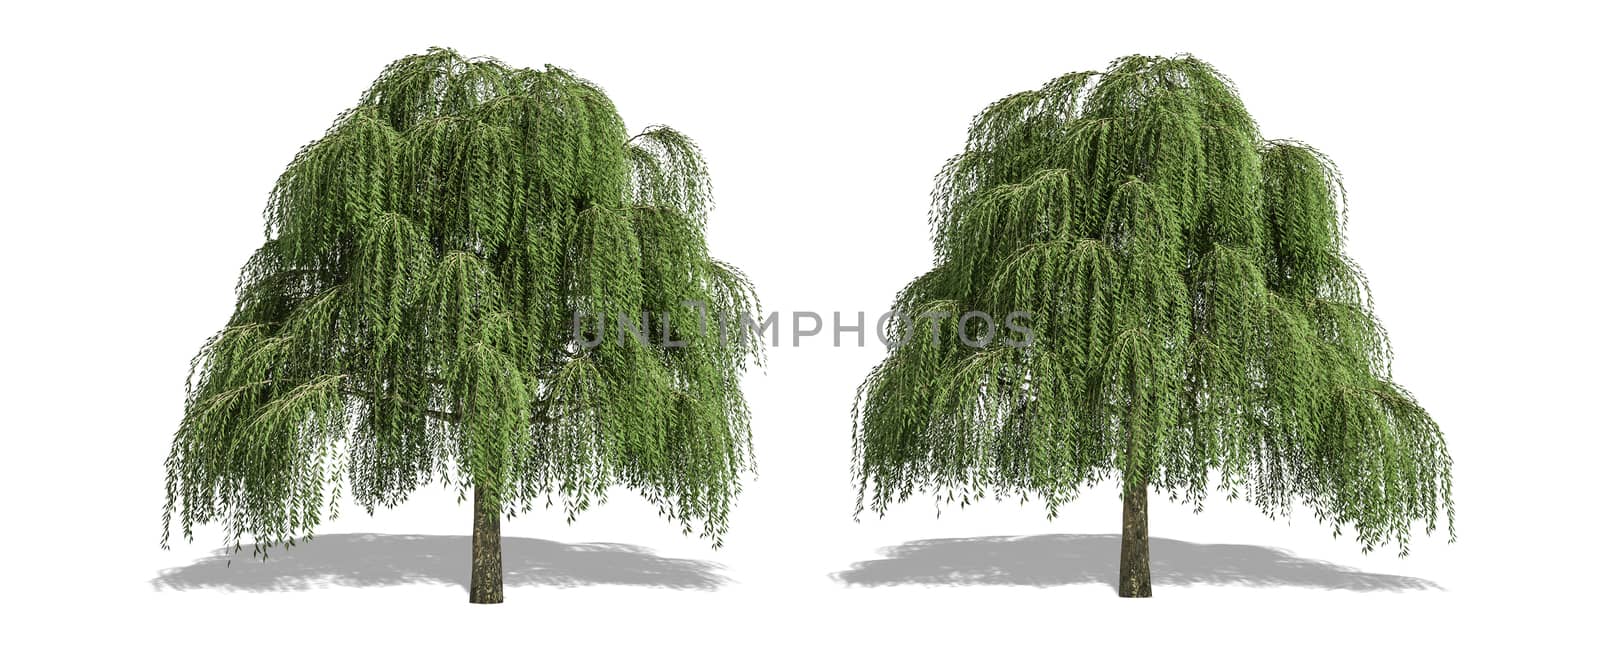 Beautiful Salix tree isolated and cutting on a white background with clipping path. by anotestocker